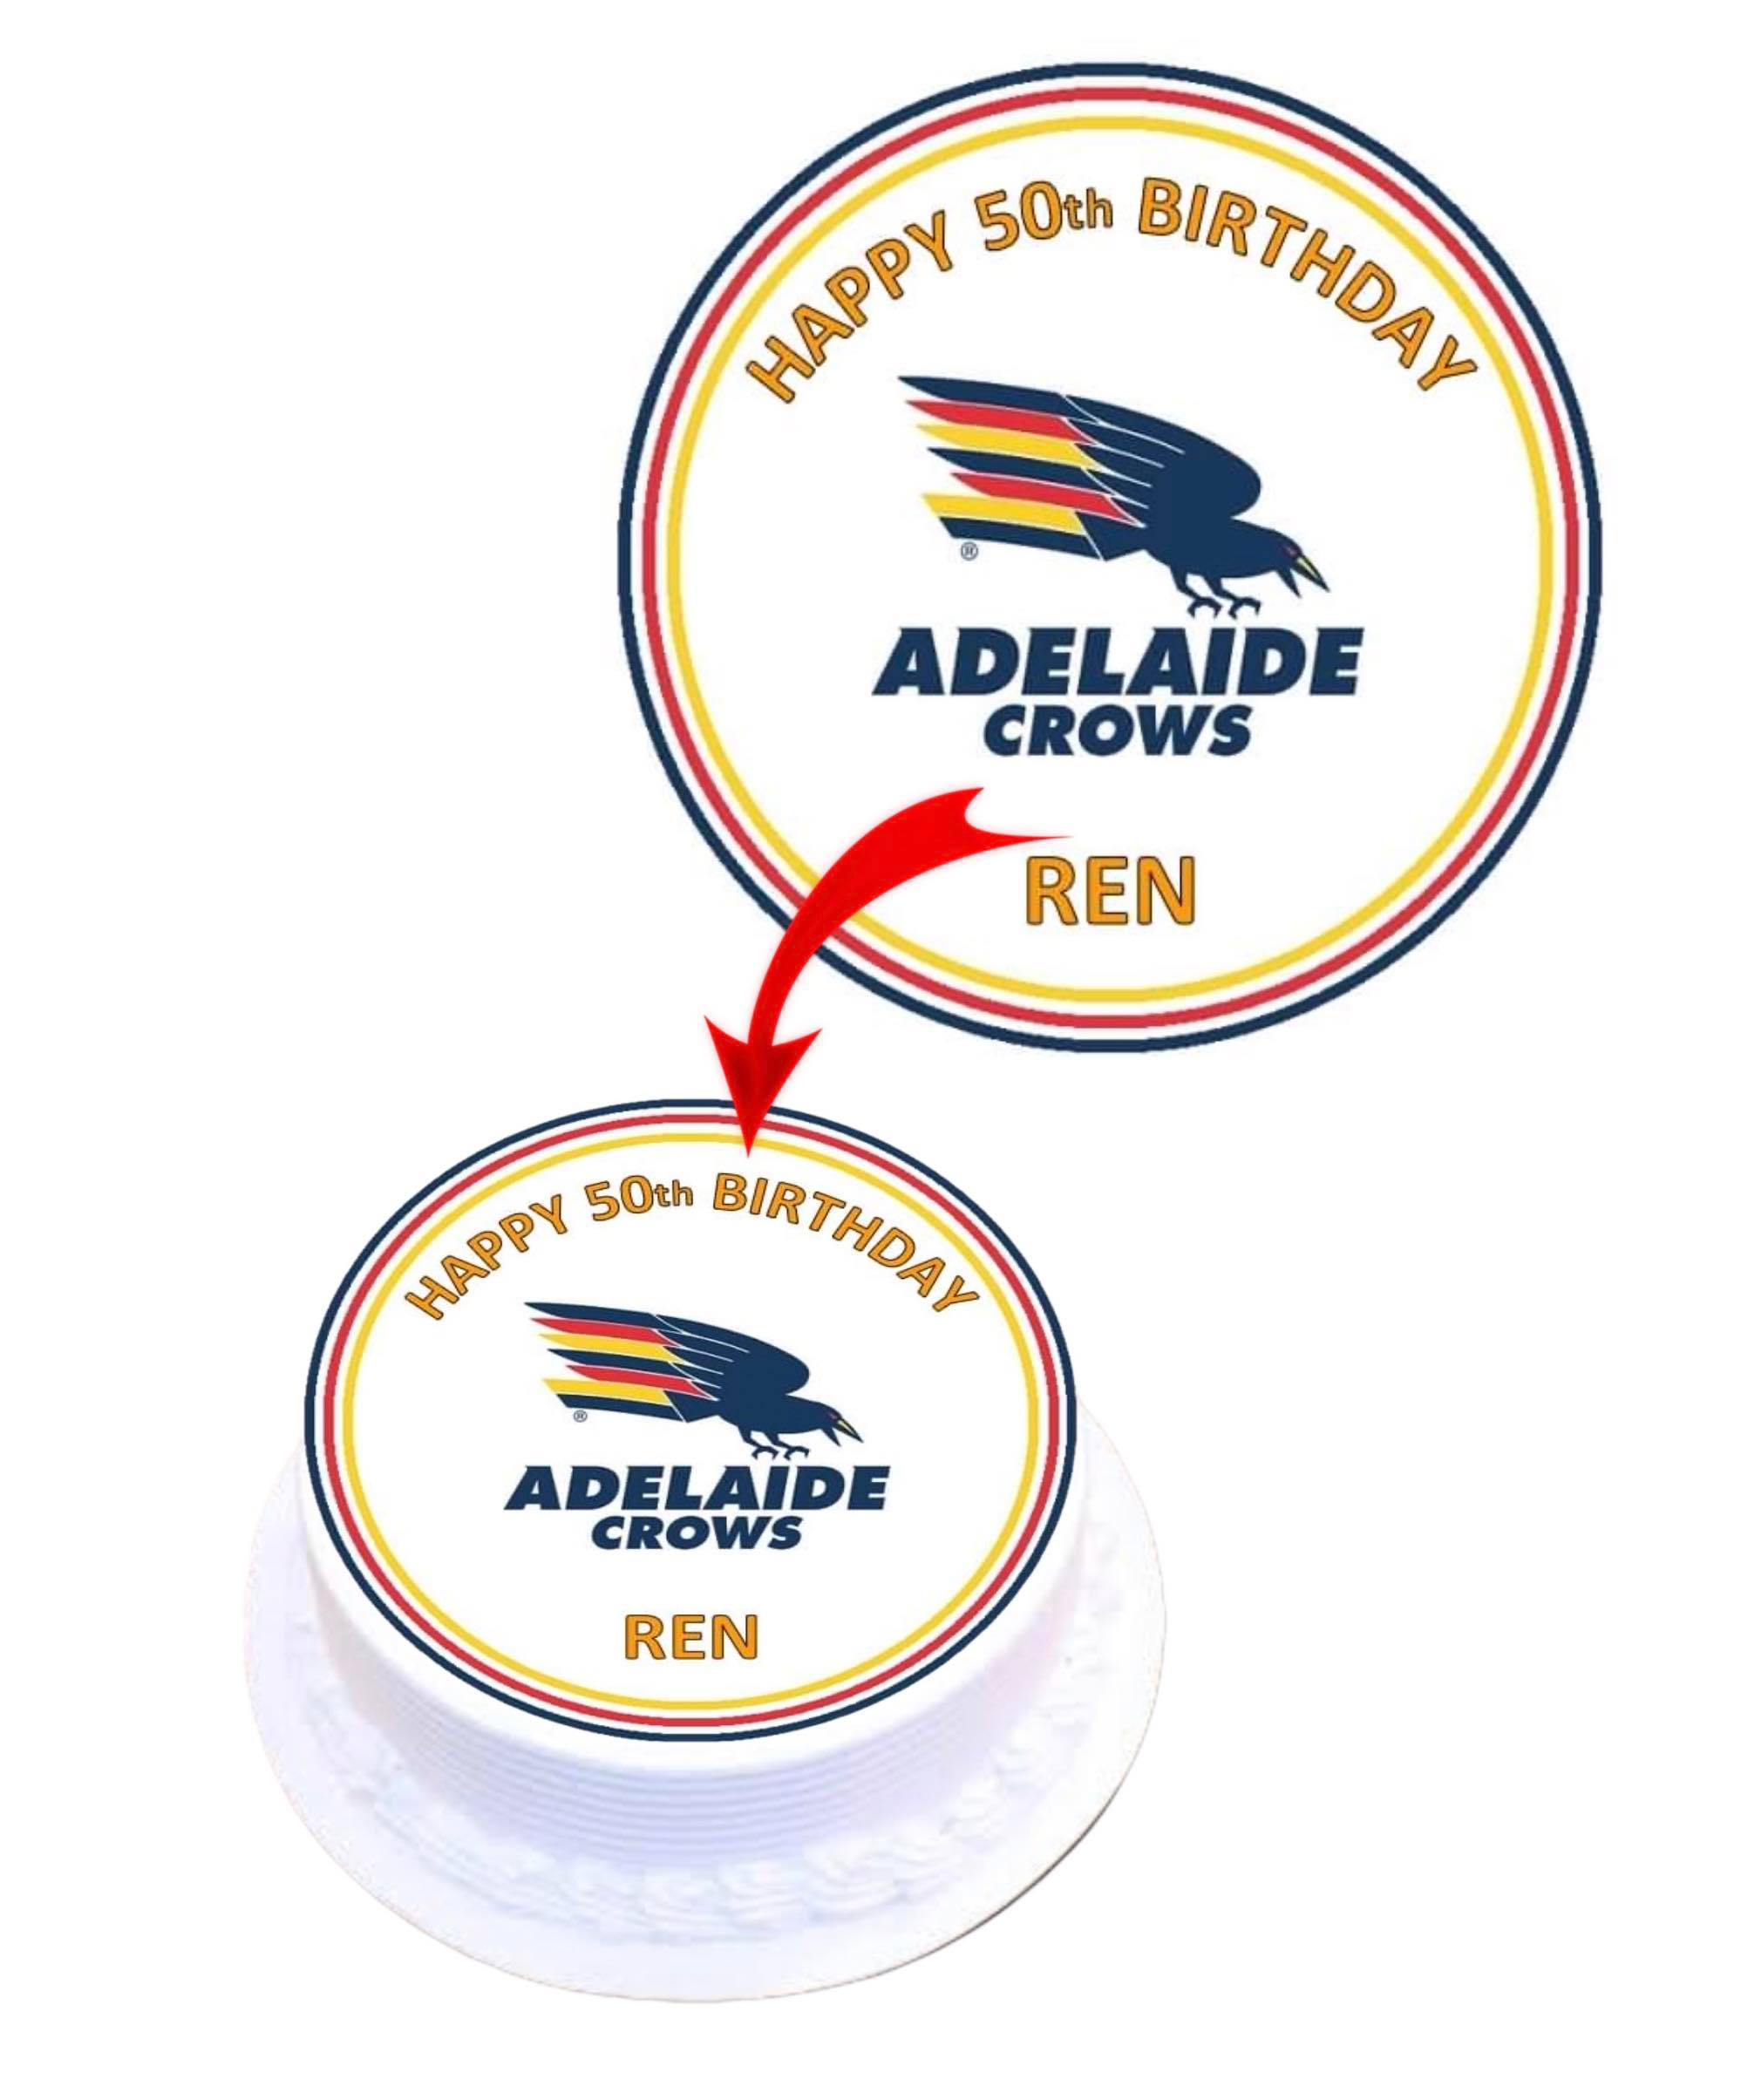 Cake Decorator Adelaide - Best cake decorator adelaide for All Cake Occasions